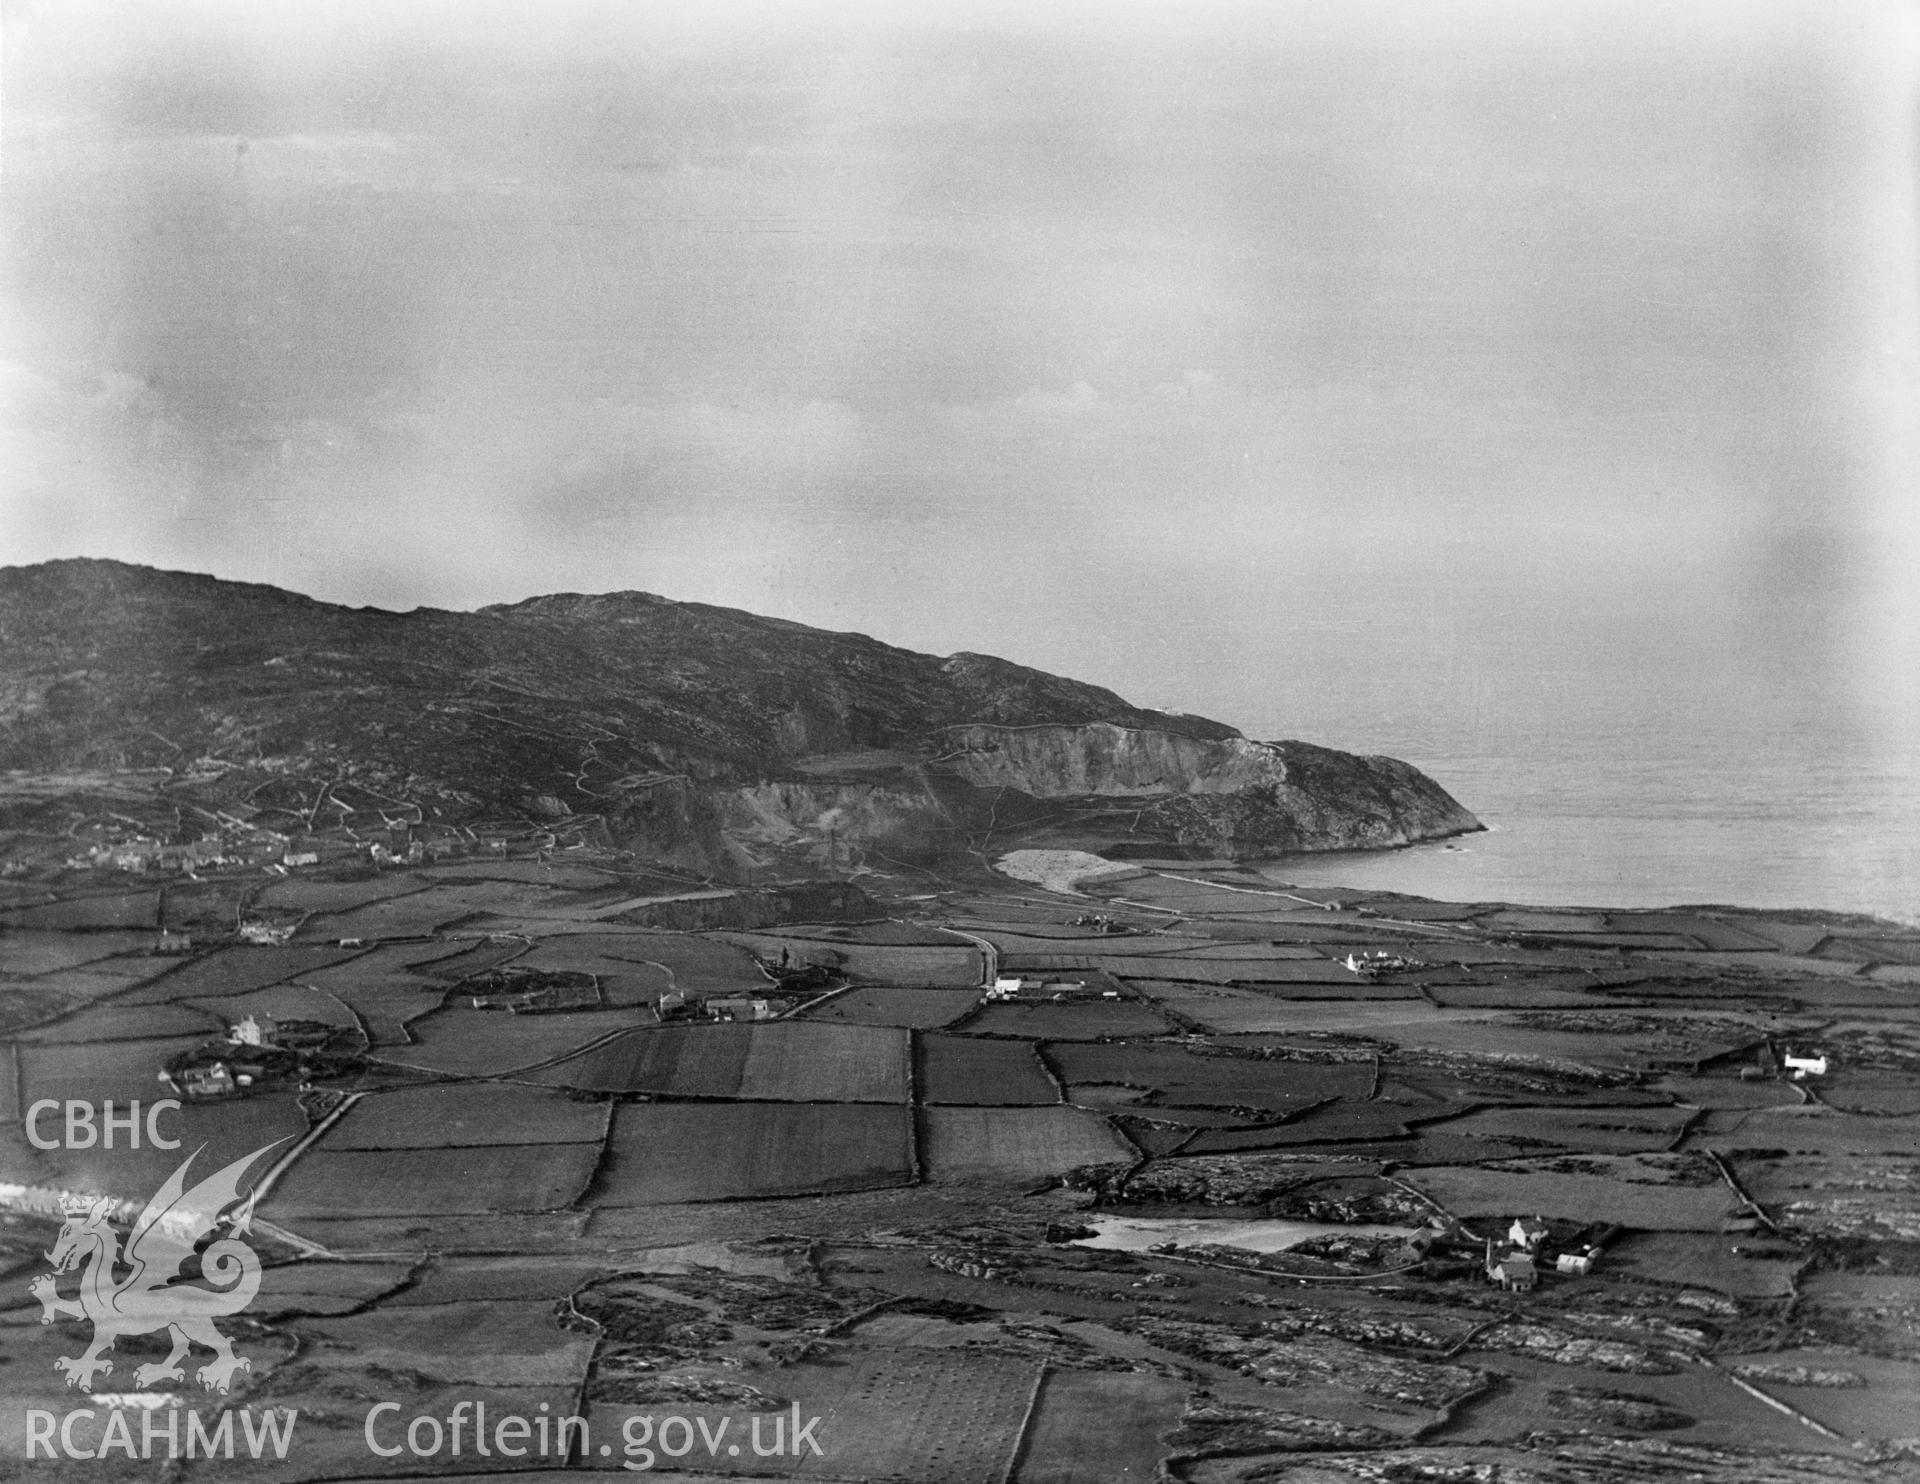 View of Holyhead Island showing Holyhead Mountain, oblique aerial view. 5?x4? black and white glass plate negative.